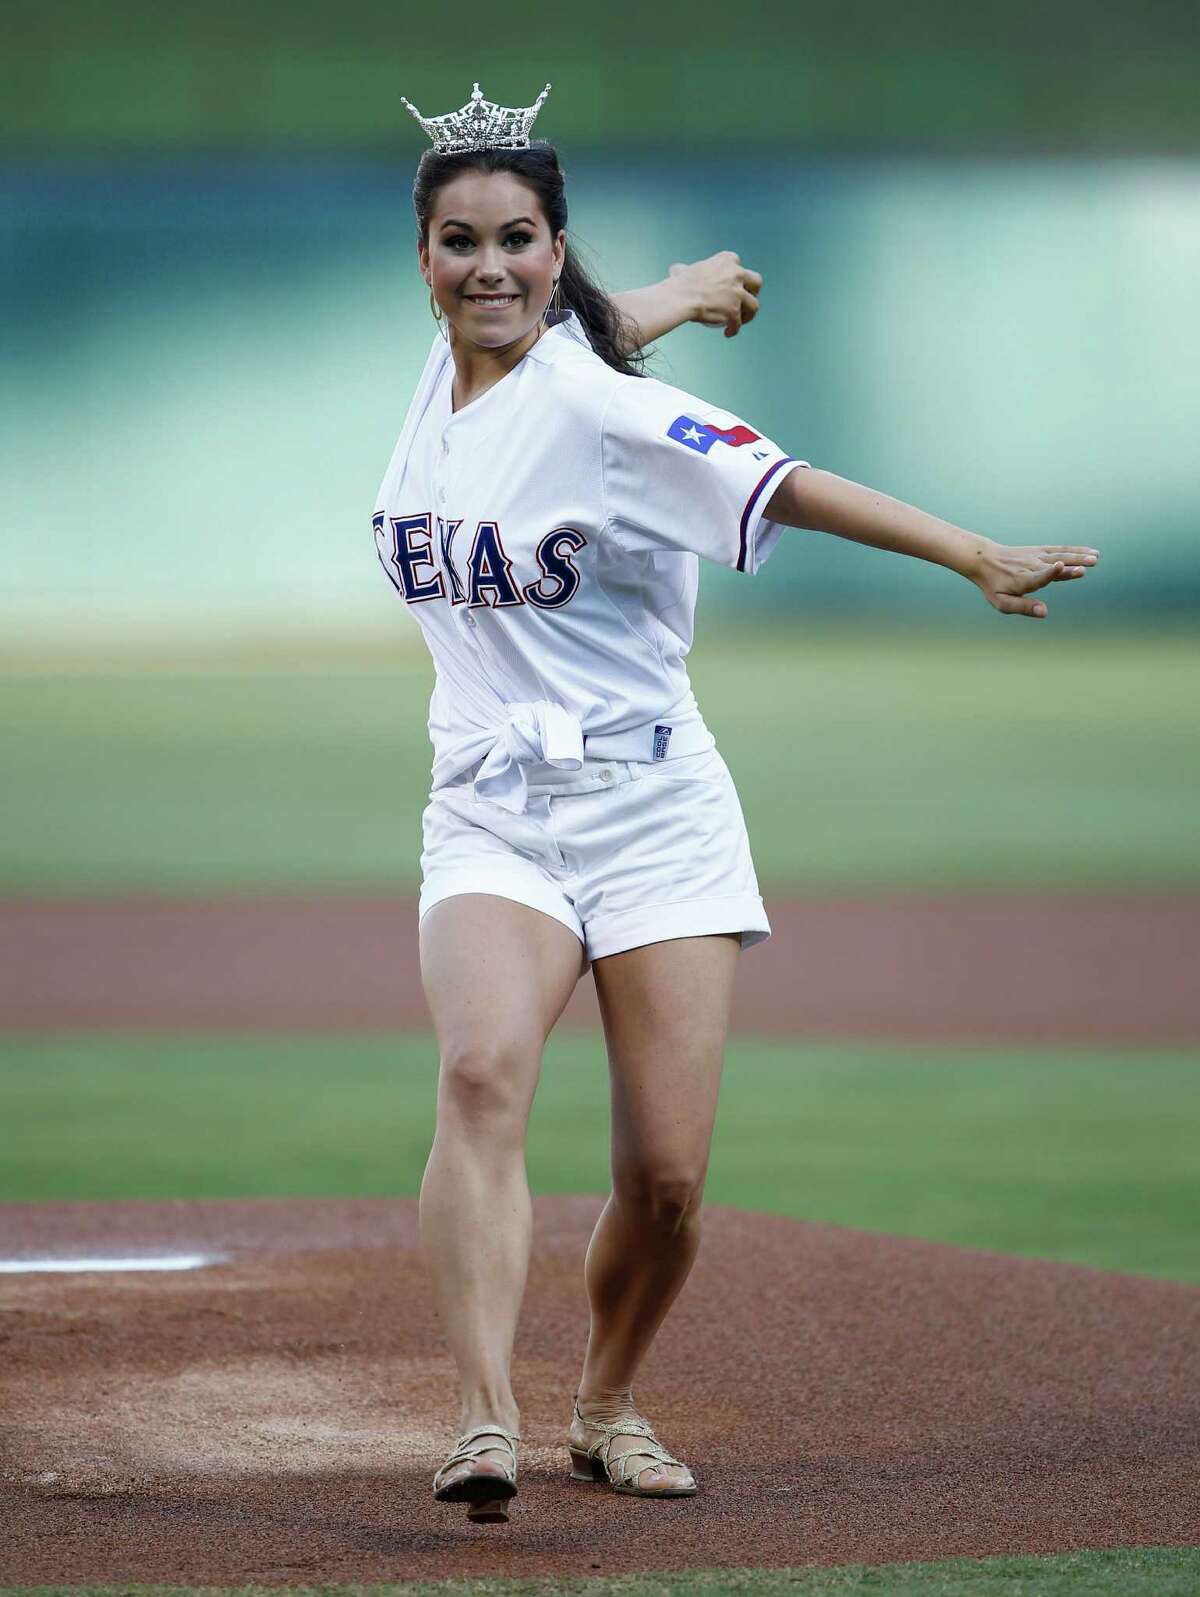 Miss Texas 2014 Monique Evans throws out the ceremonial first-pitch before the baseball between the Los Angeles Angels and the Texas Rangers, Friday, Aug. 15, 2014, in Arlington, Texas.